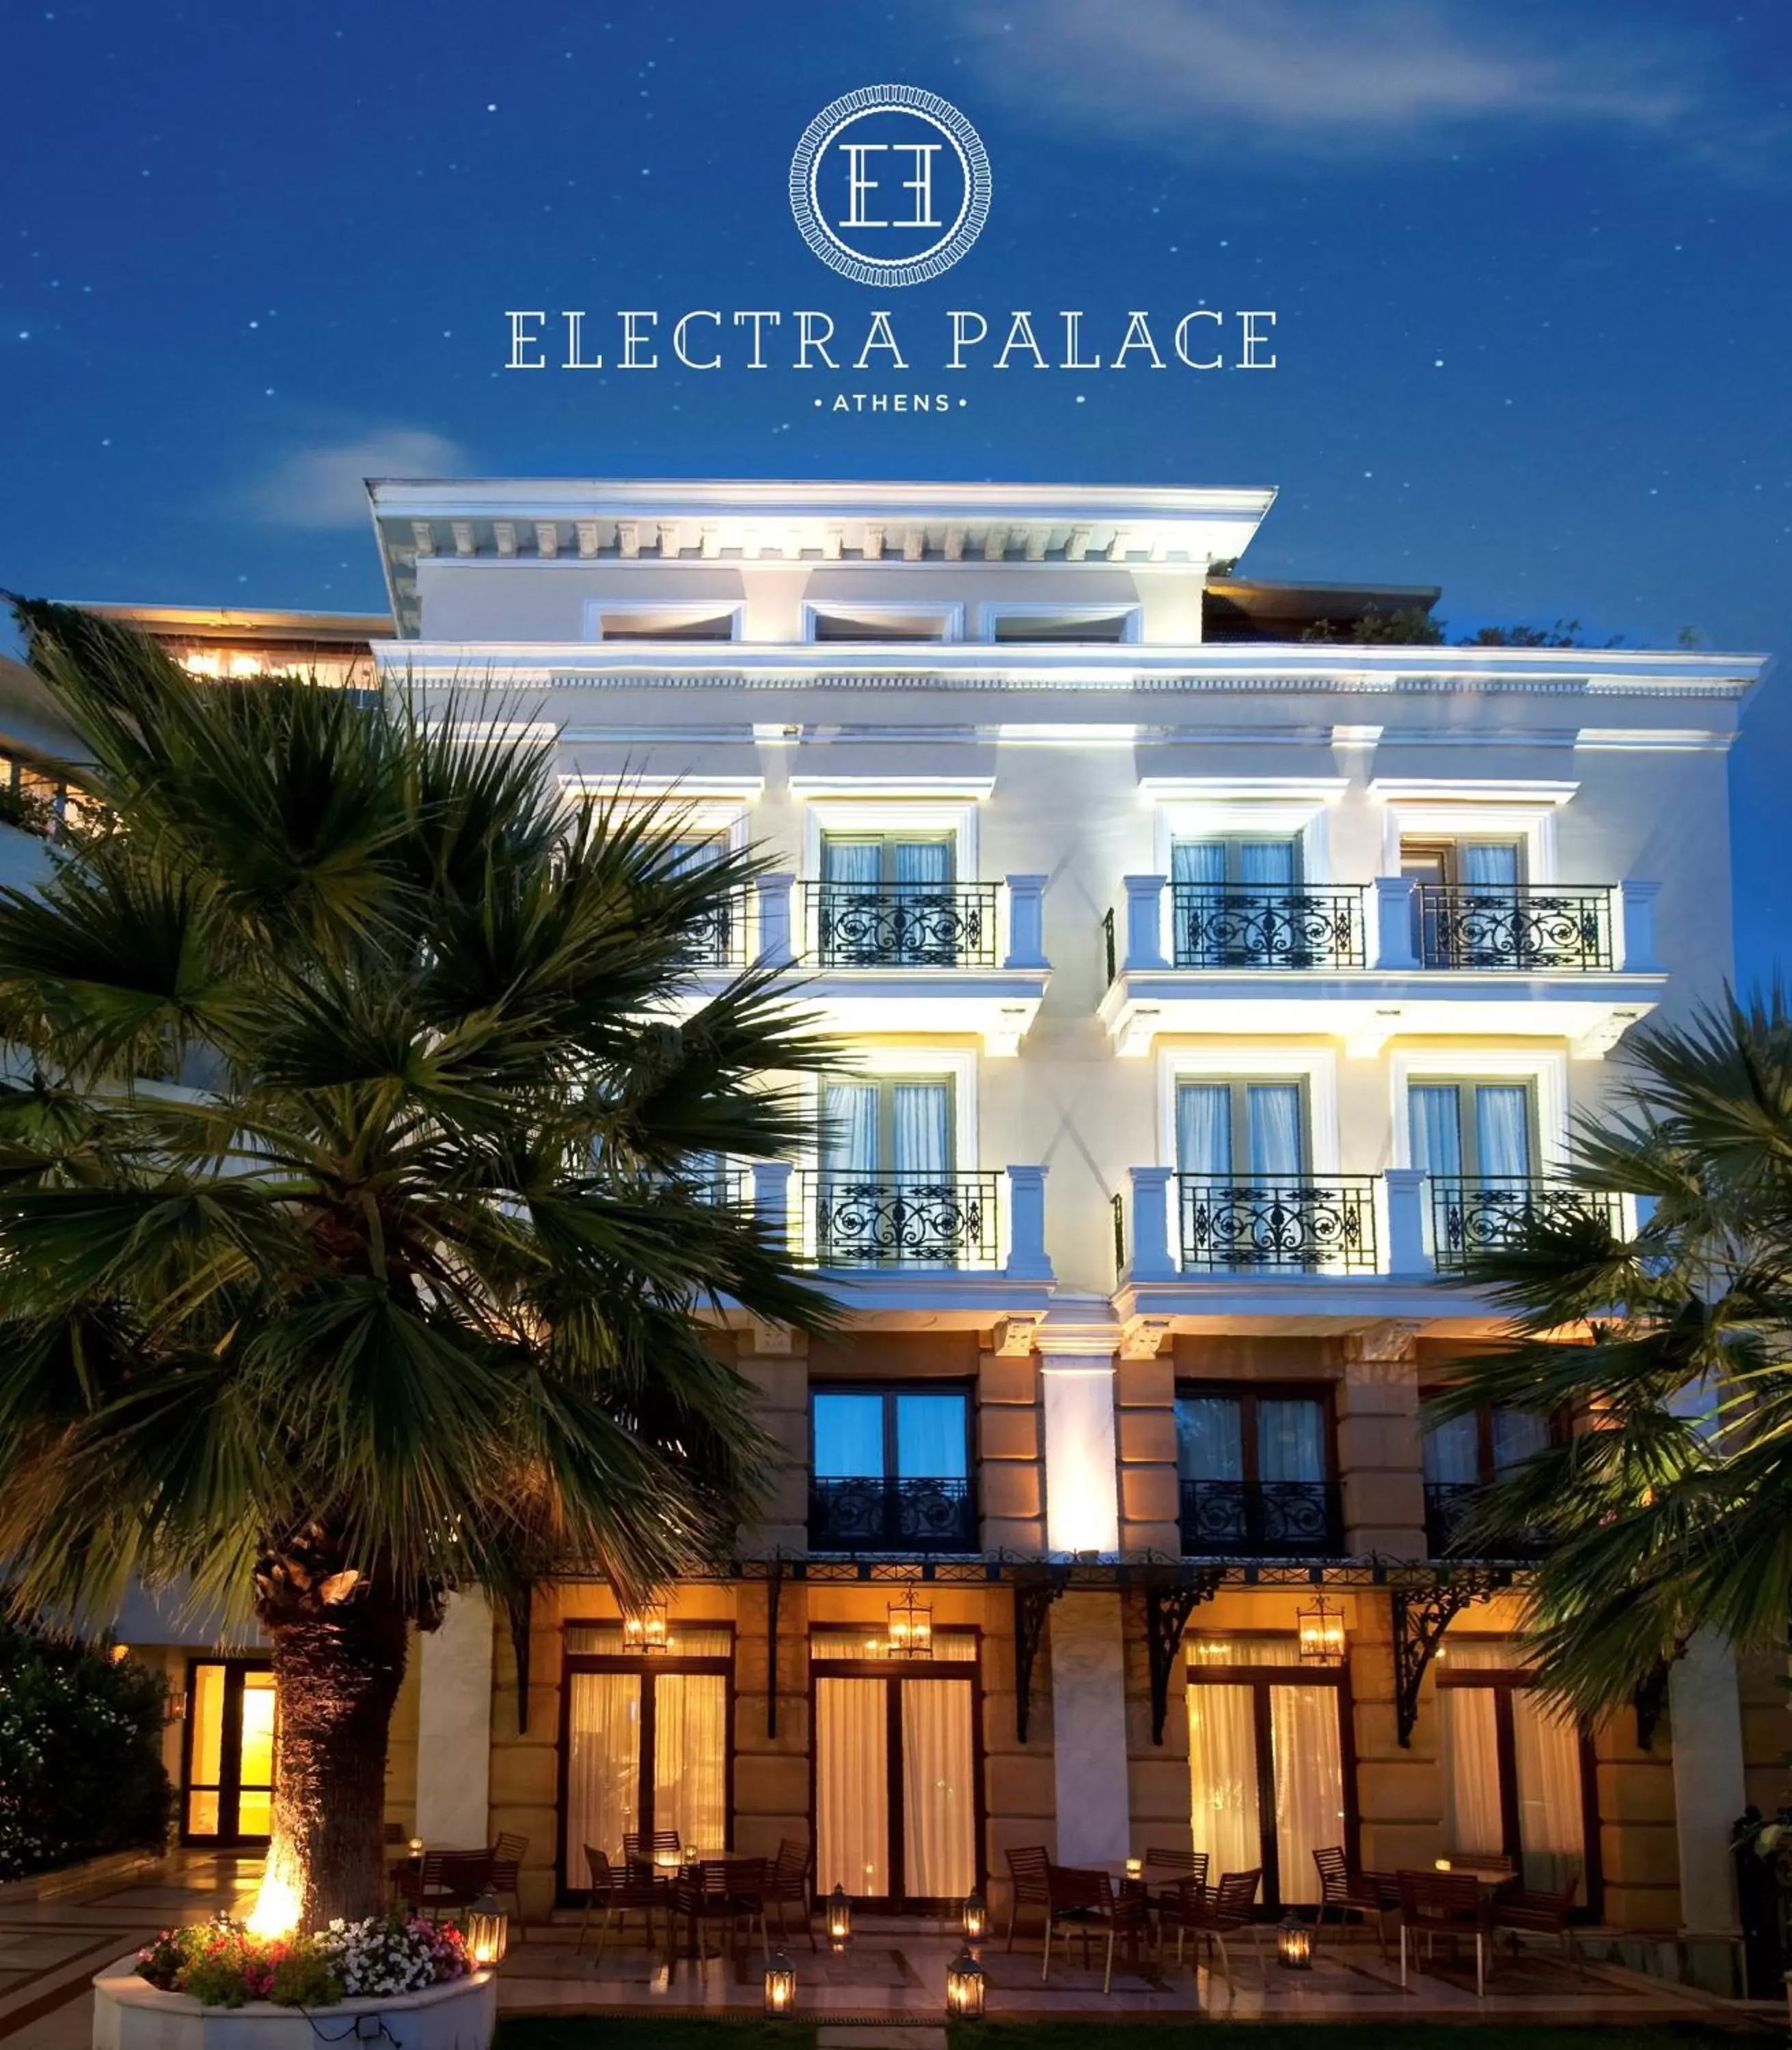 Property Building in Electra Palace Athens